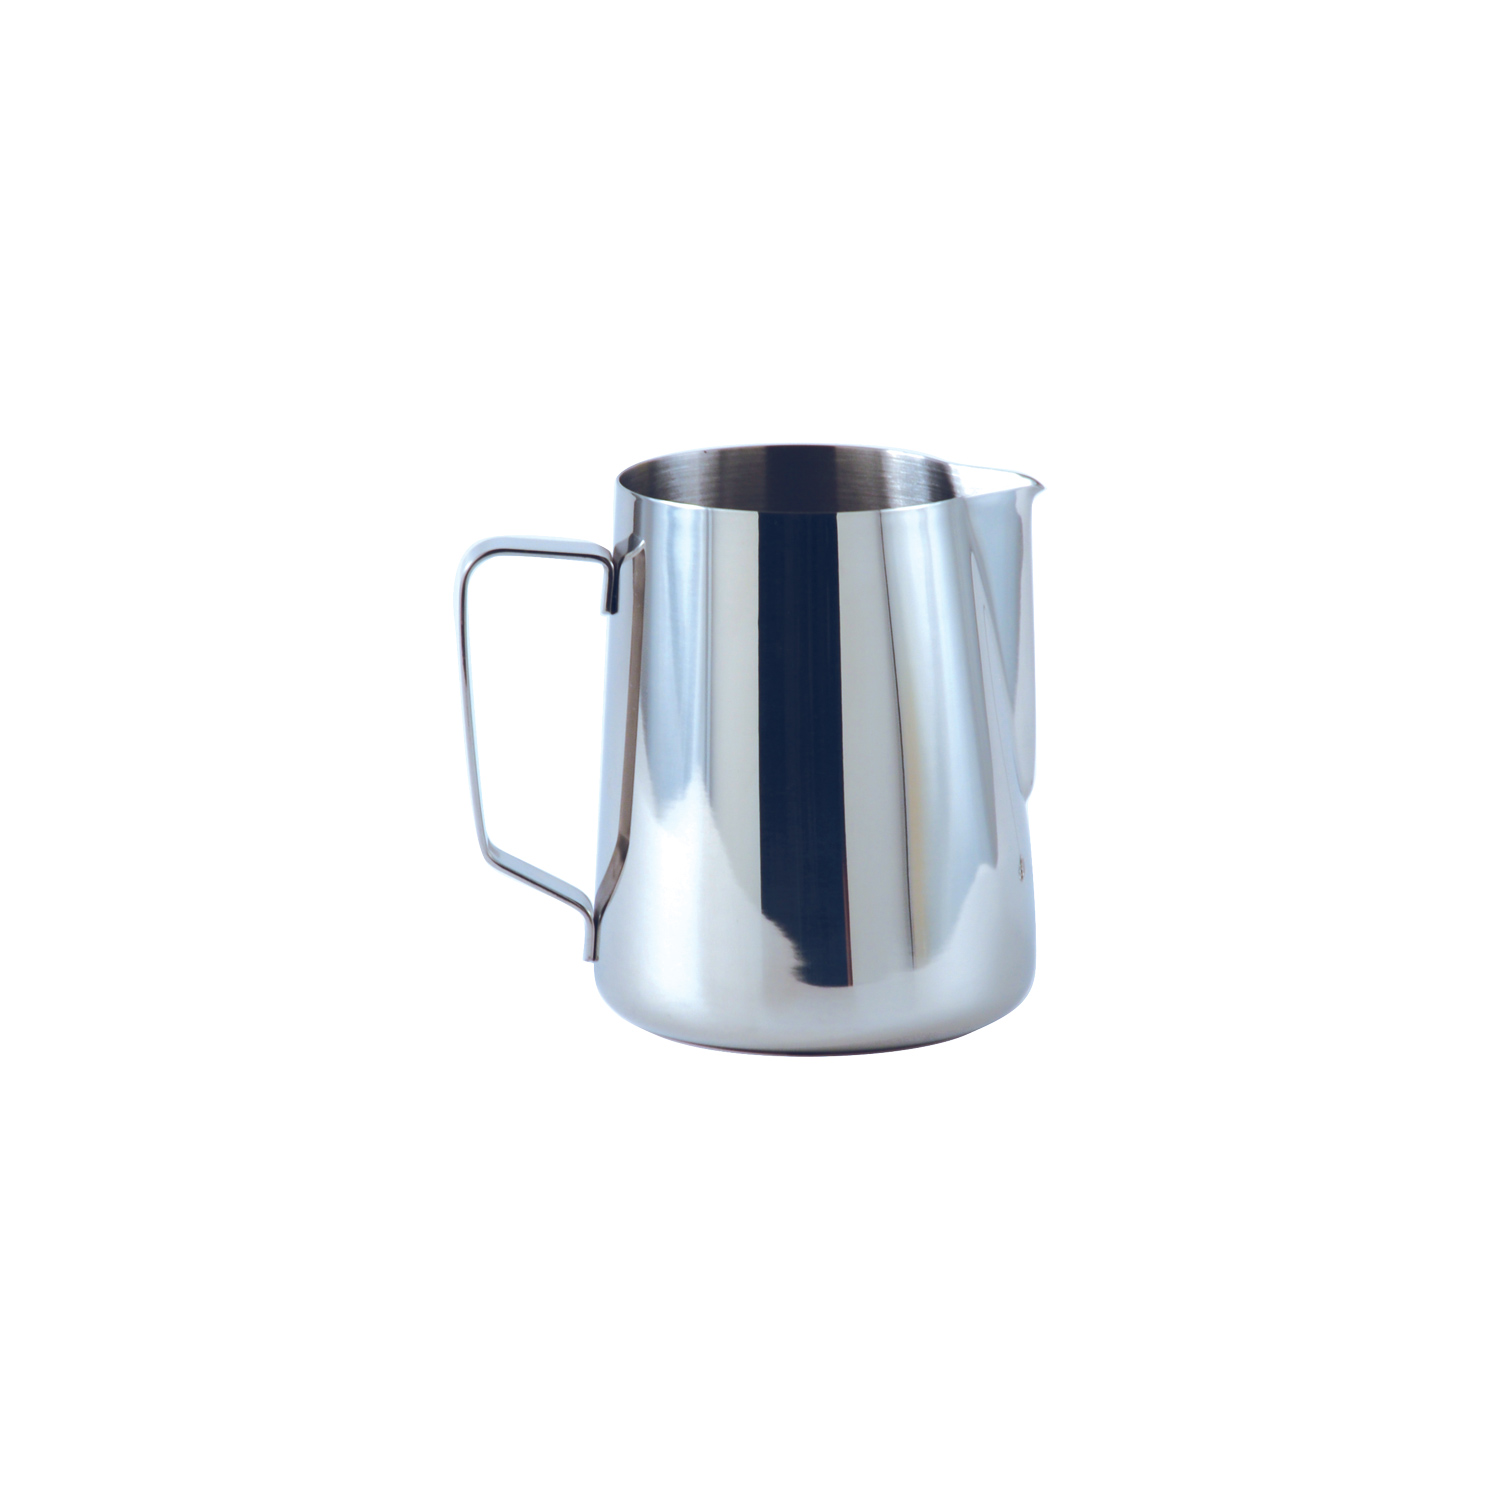 CAC China BVFP-20 Stainless Steel Frothing Pitcher 20 oz.